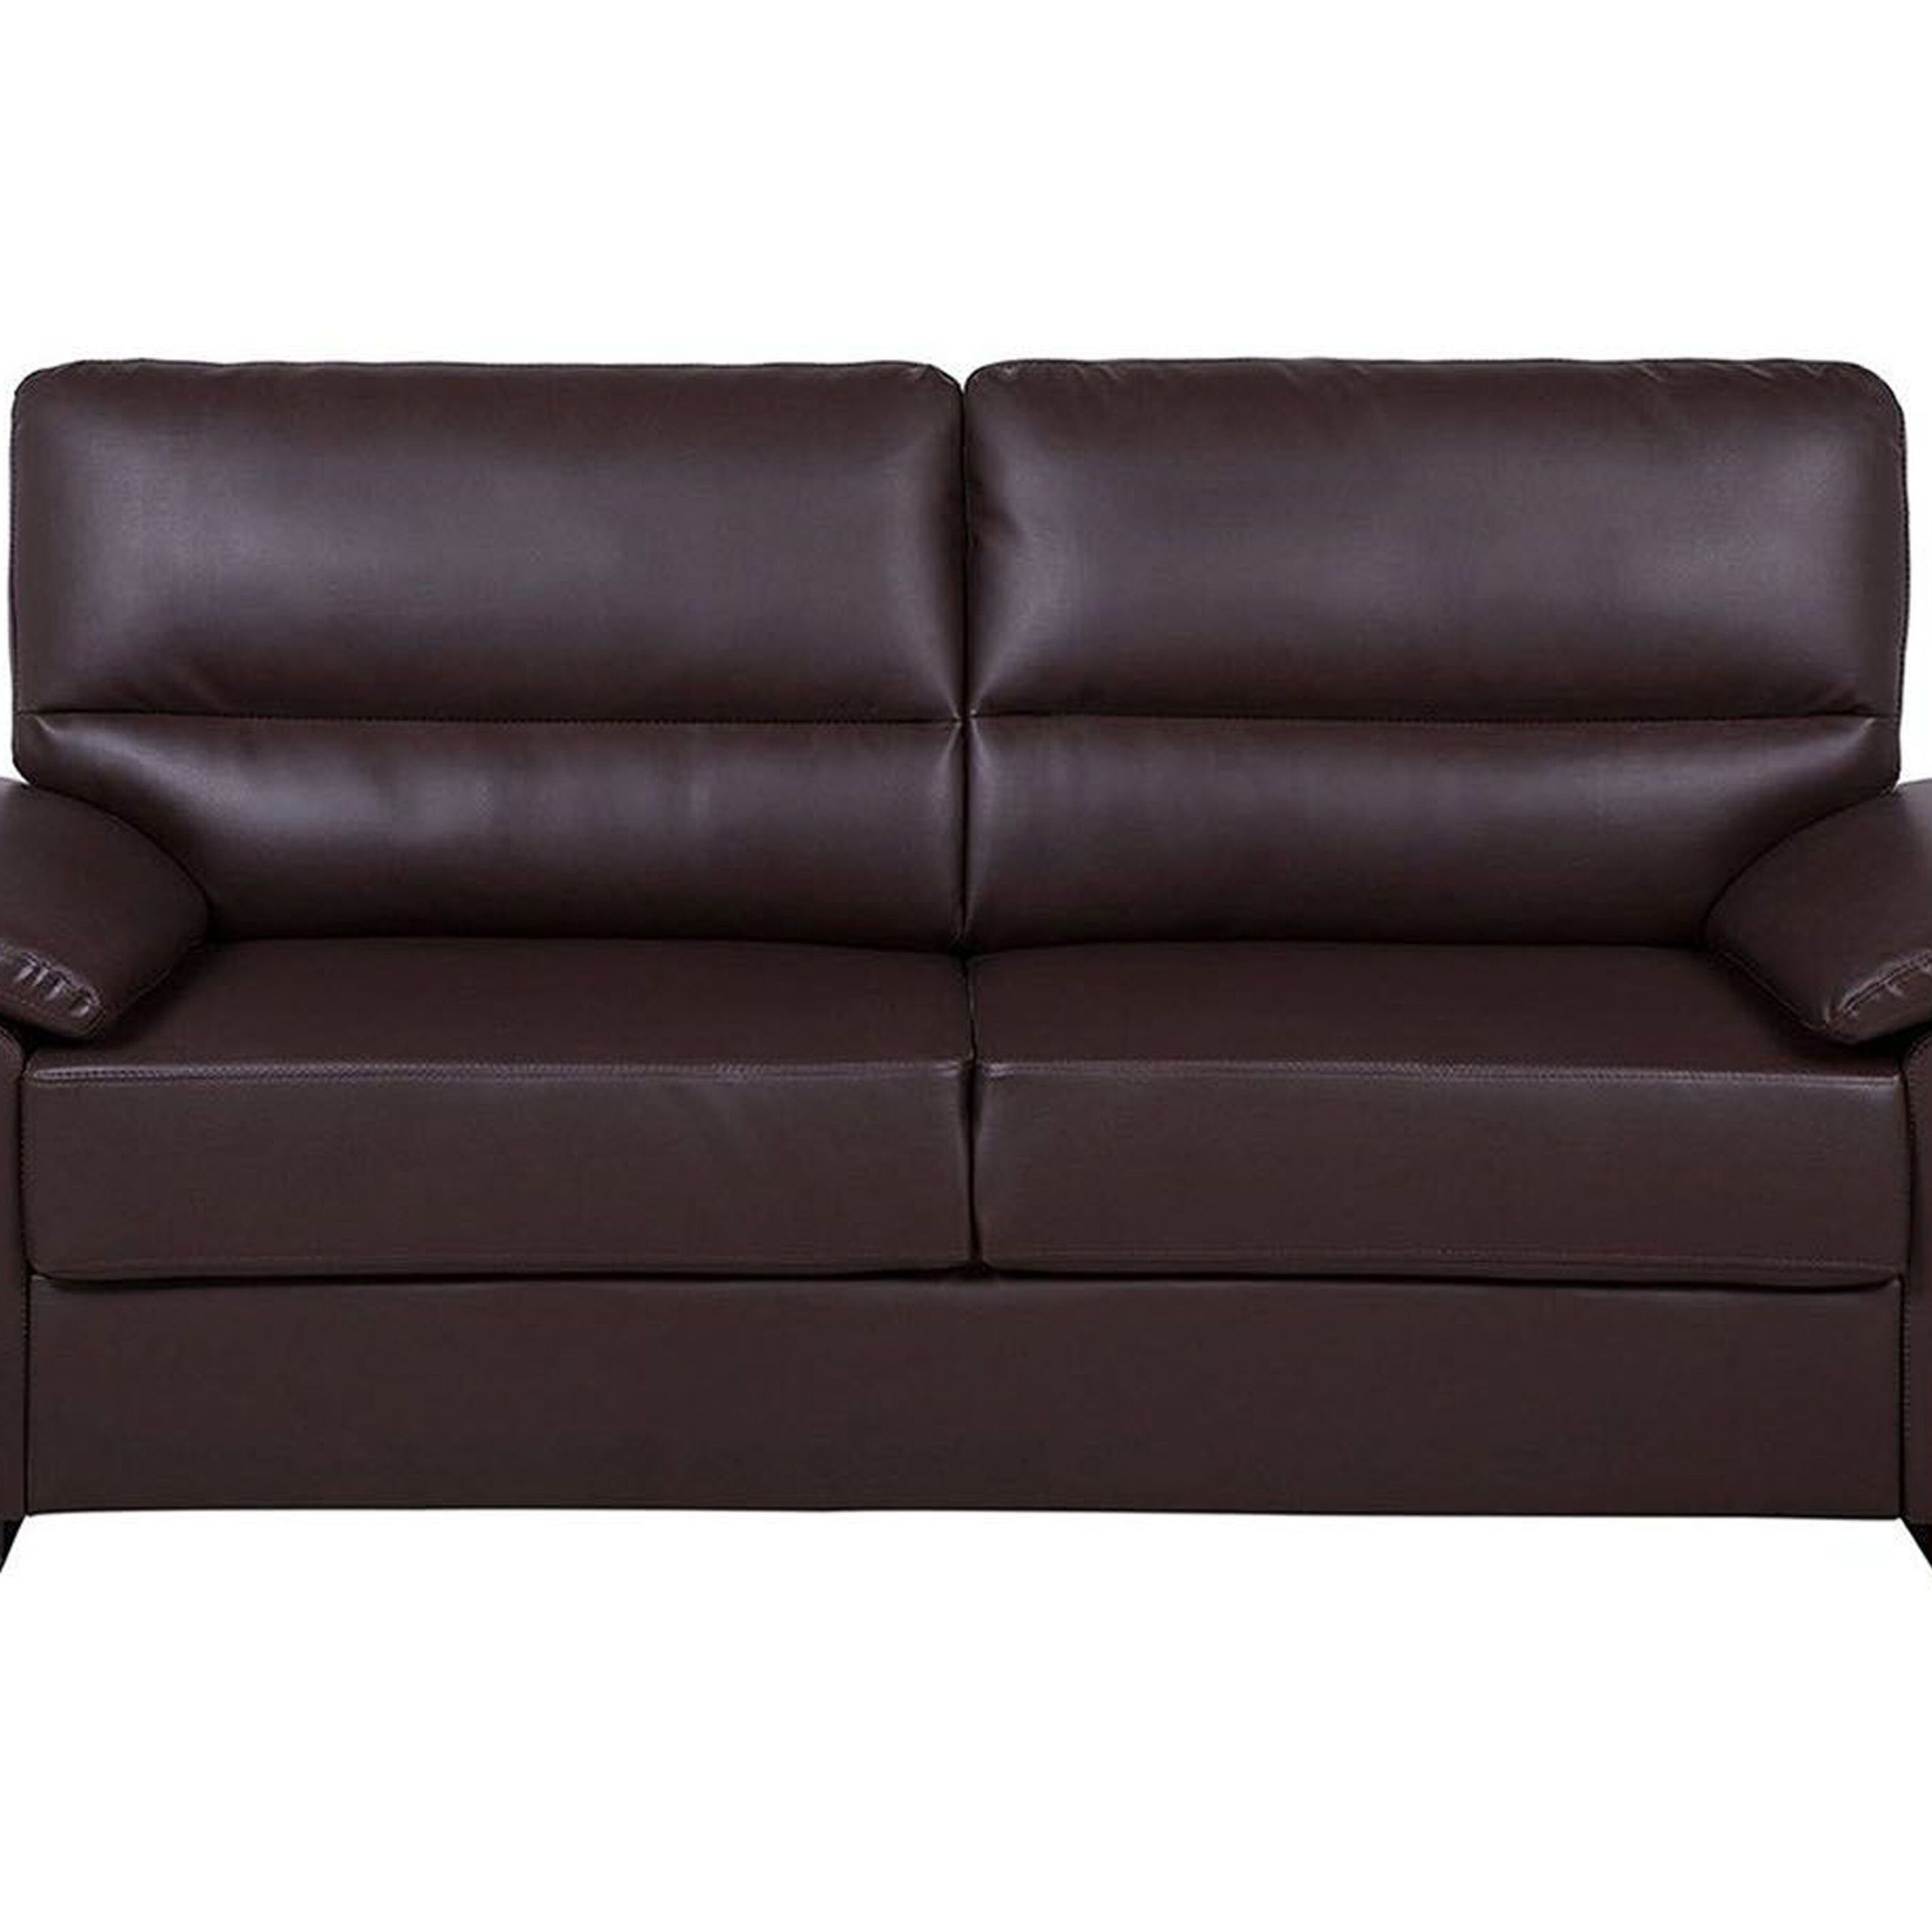 3 Seater Faux Leather Sofa Brown Vogar | Beliani.co.uk In Traditional 3 Seater Faux Leather Sofas (Gallery 15 of 20)